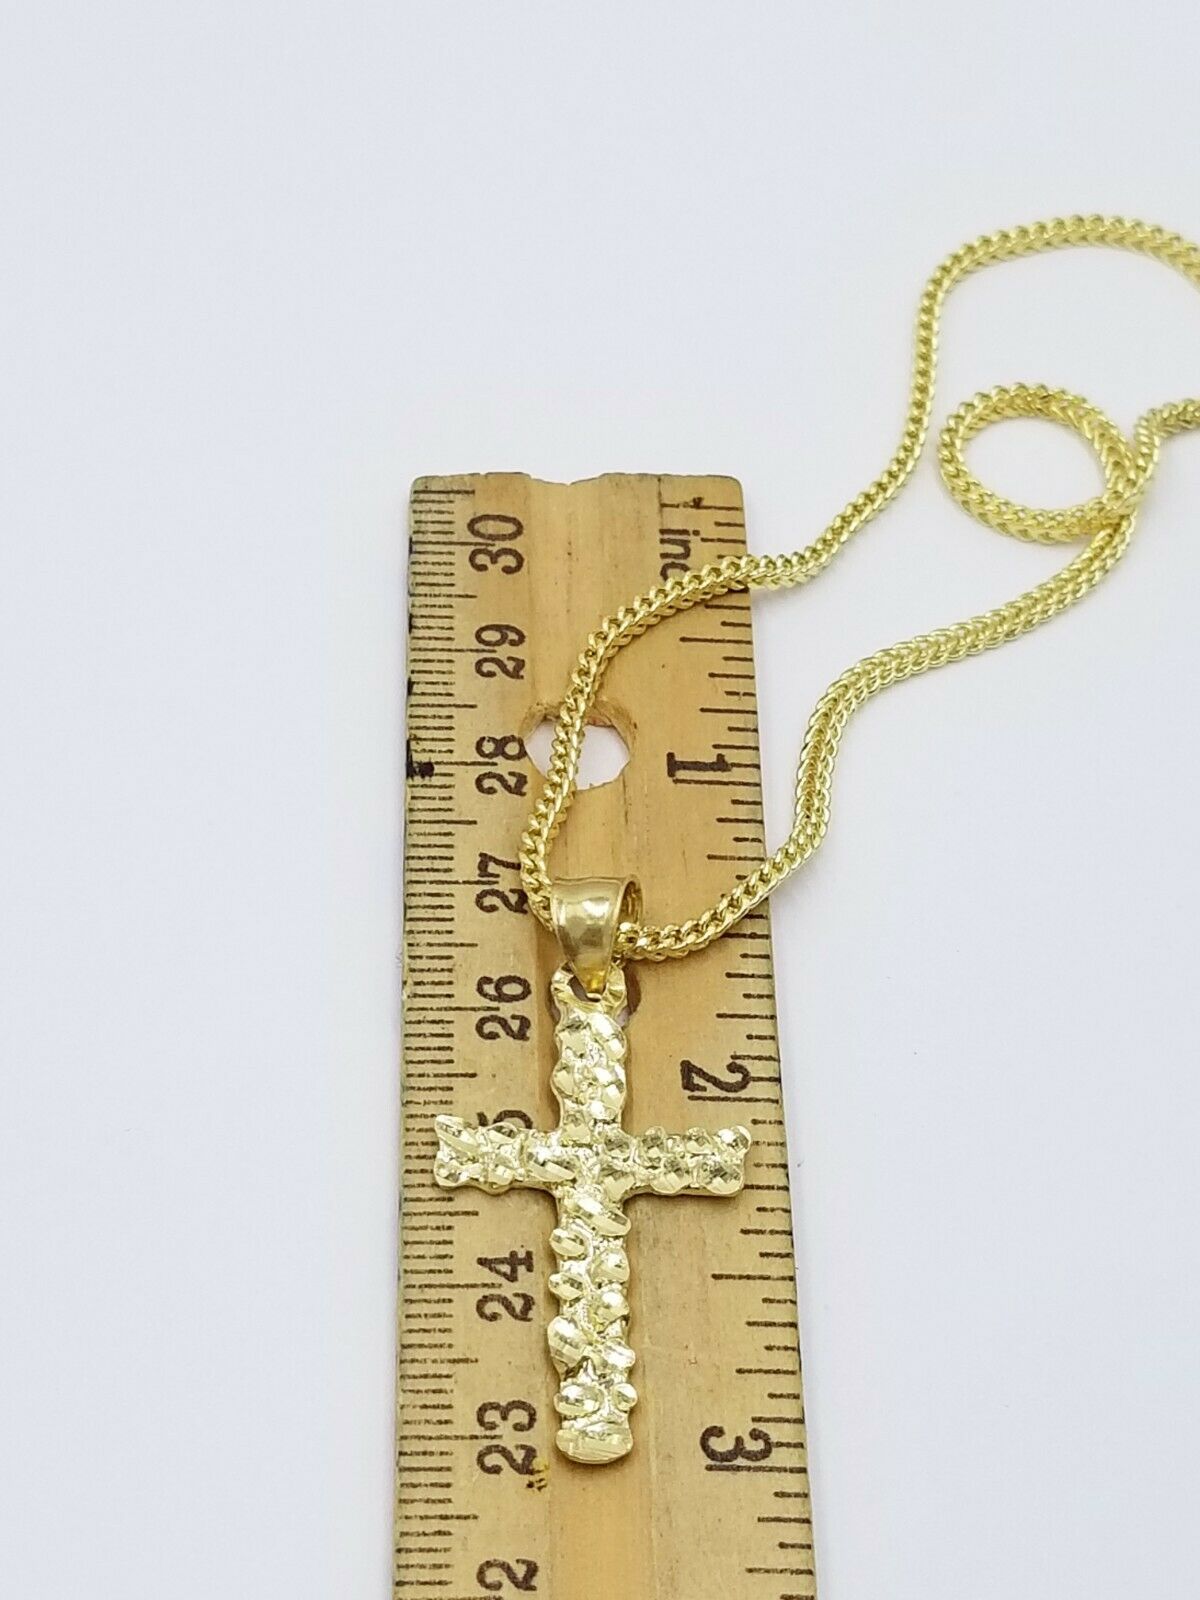 REAL 10k Yellow Gold Cross Pendant 2mm Rope Chain 20"-26" Inches Diamond Cut